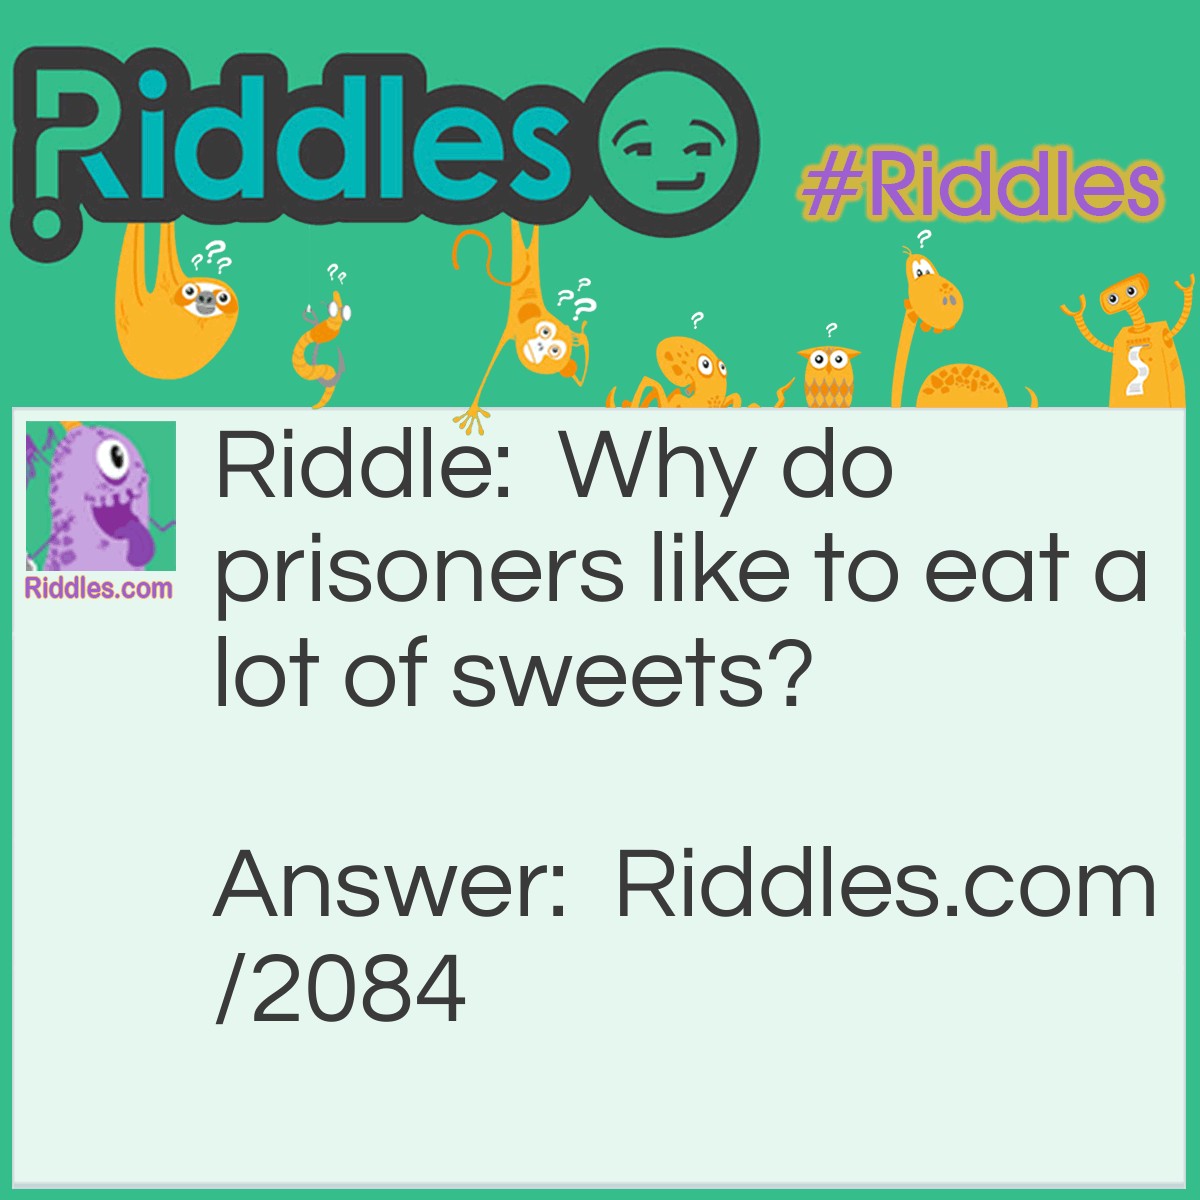 Riddle: Why do prisoners like to eat a lot of sweets? Answer: Because they would like to break out